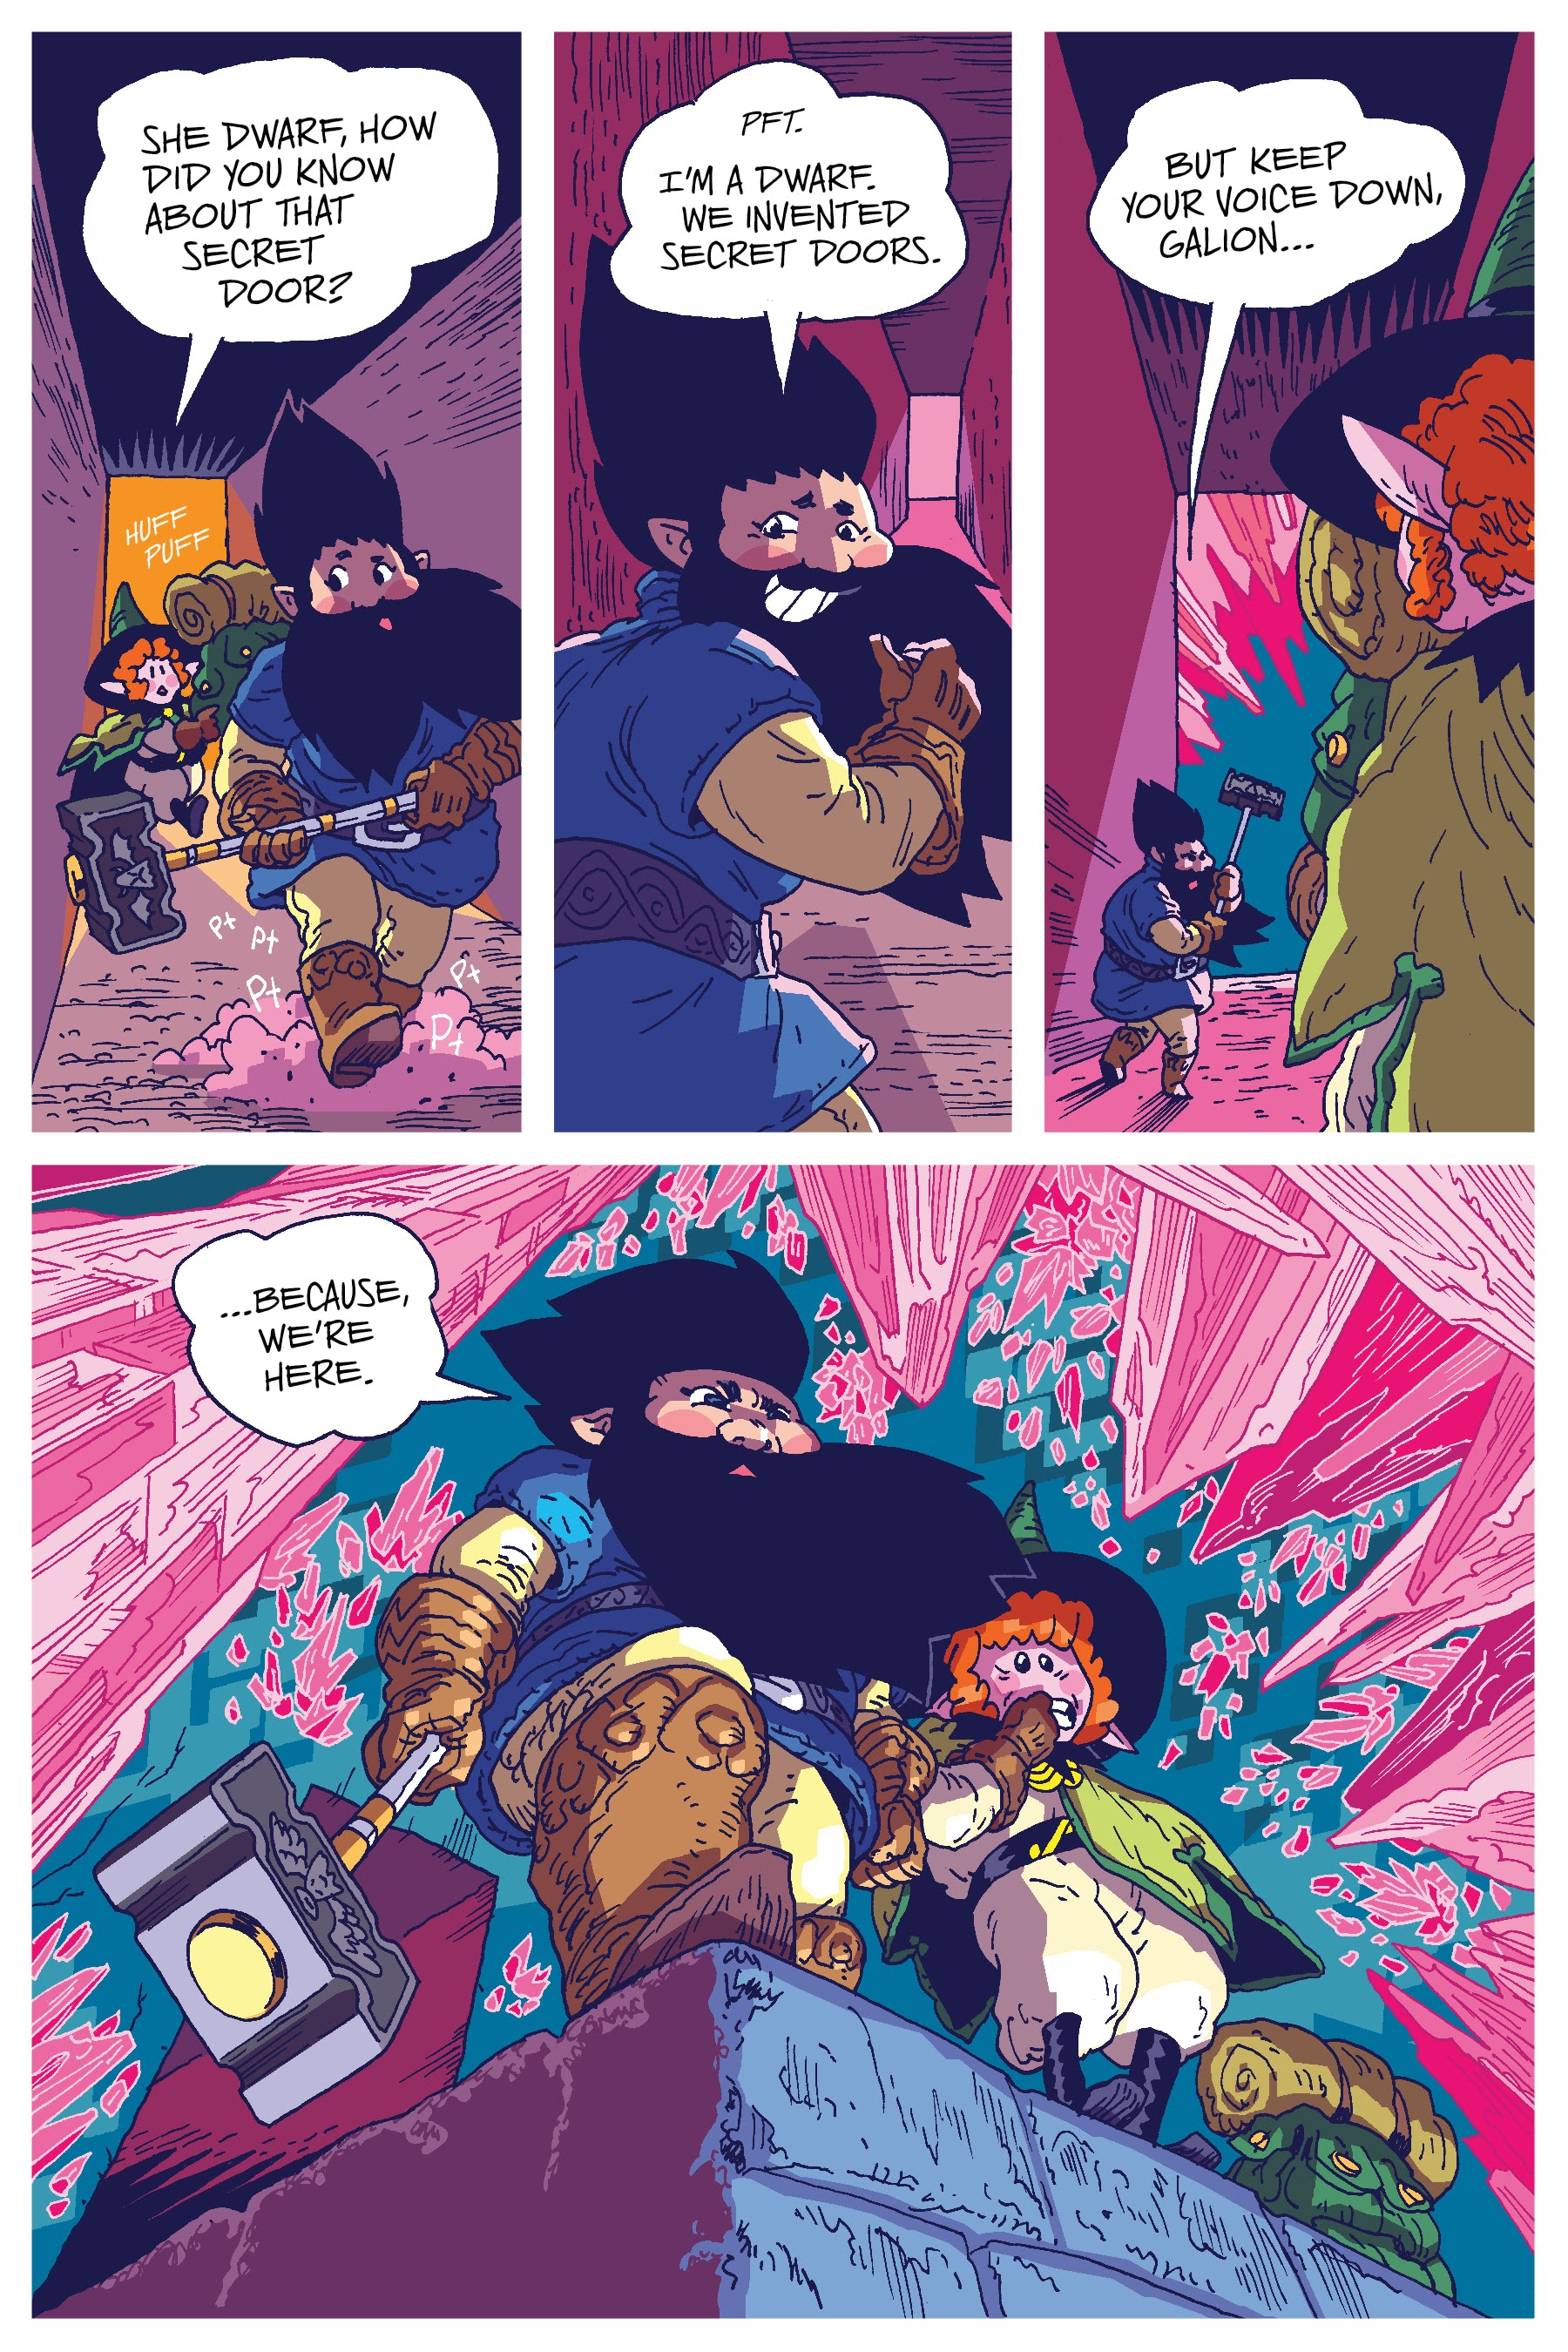 Read online The Savage Beard of She Dwarf comic -  Issue # TPB (Part 1) - 26